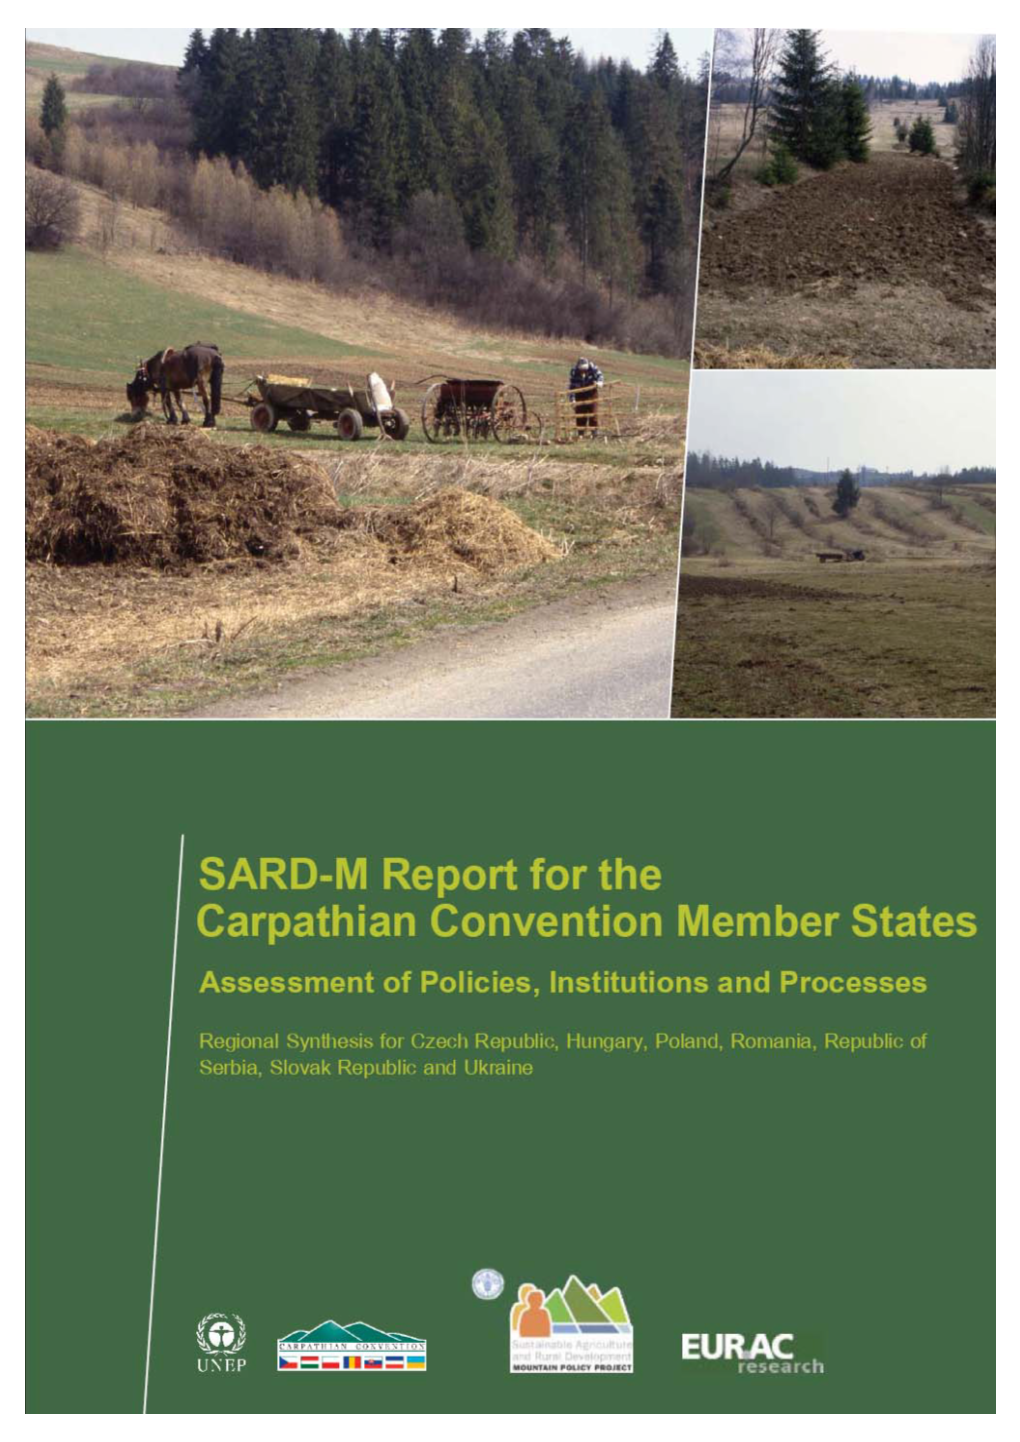 SARD-M Report for the Carpathian Convention Member States Assessment of Policies, Institutions and Processes